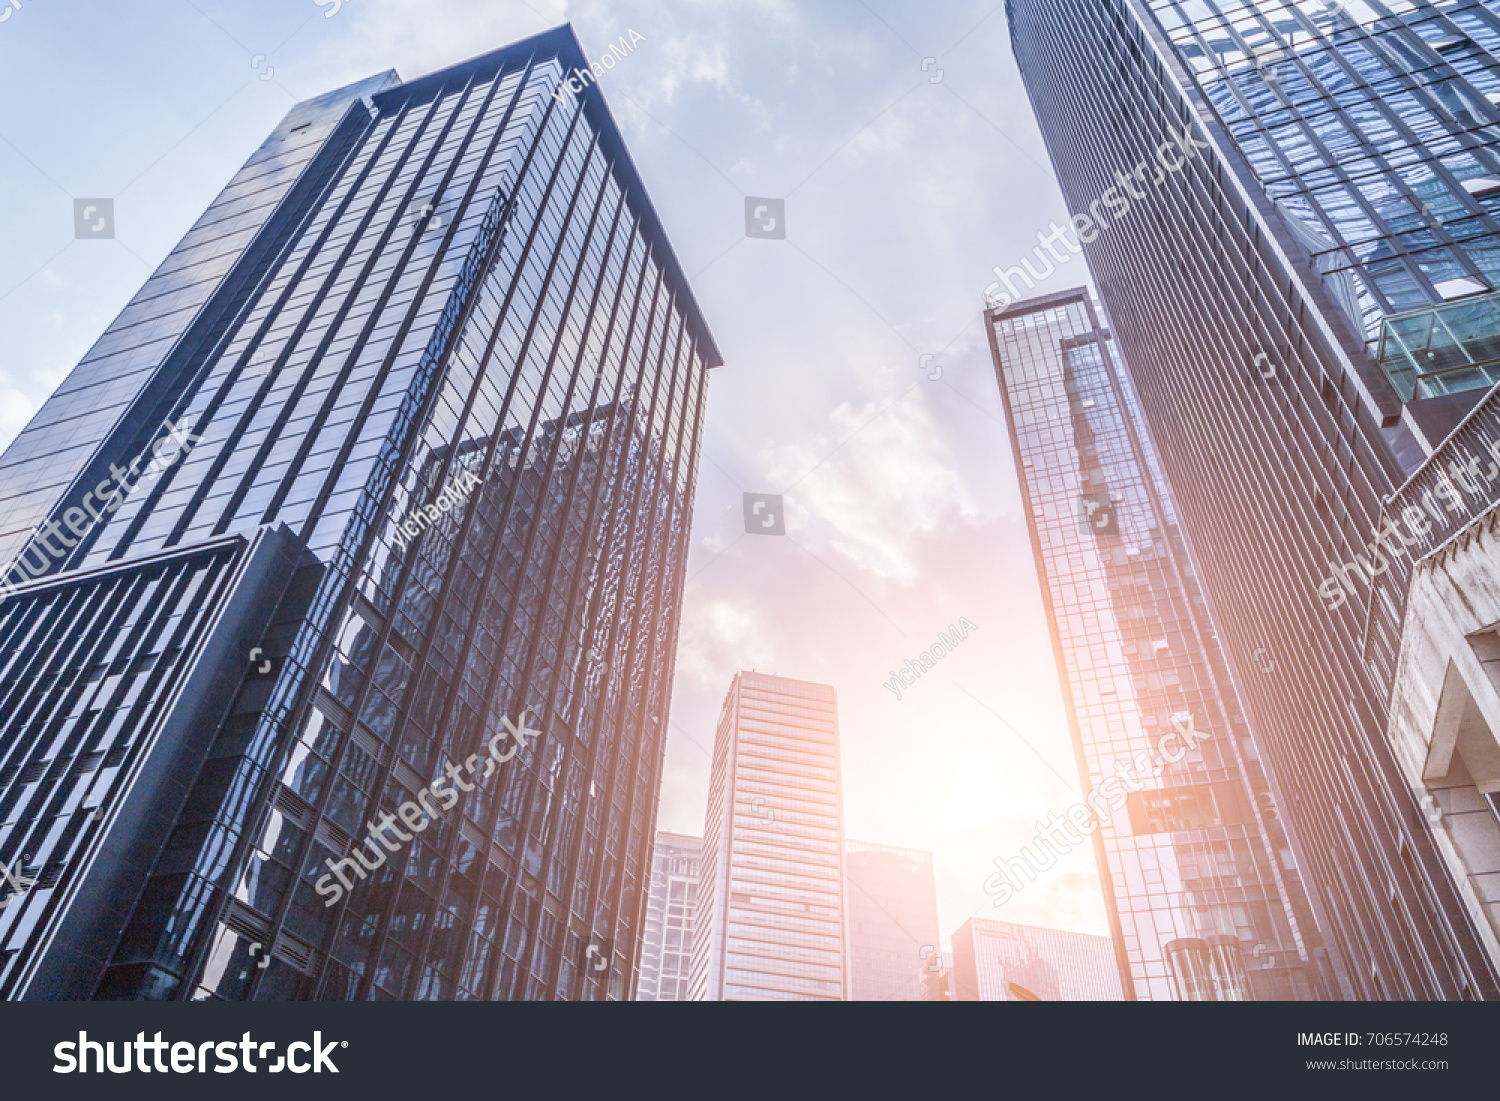 Common modern business skyscrapers, high-rise buildings, architecture raising to the sky, sun. Concepts of financial, economics,  #706574248